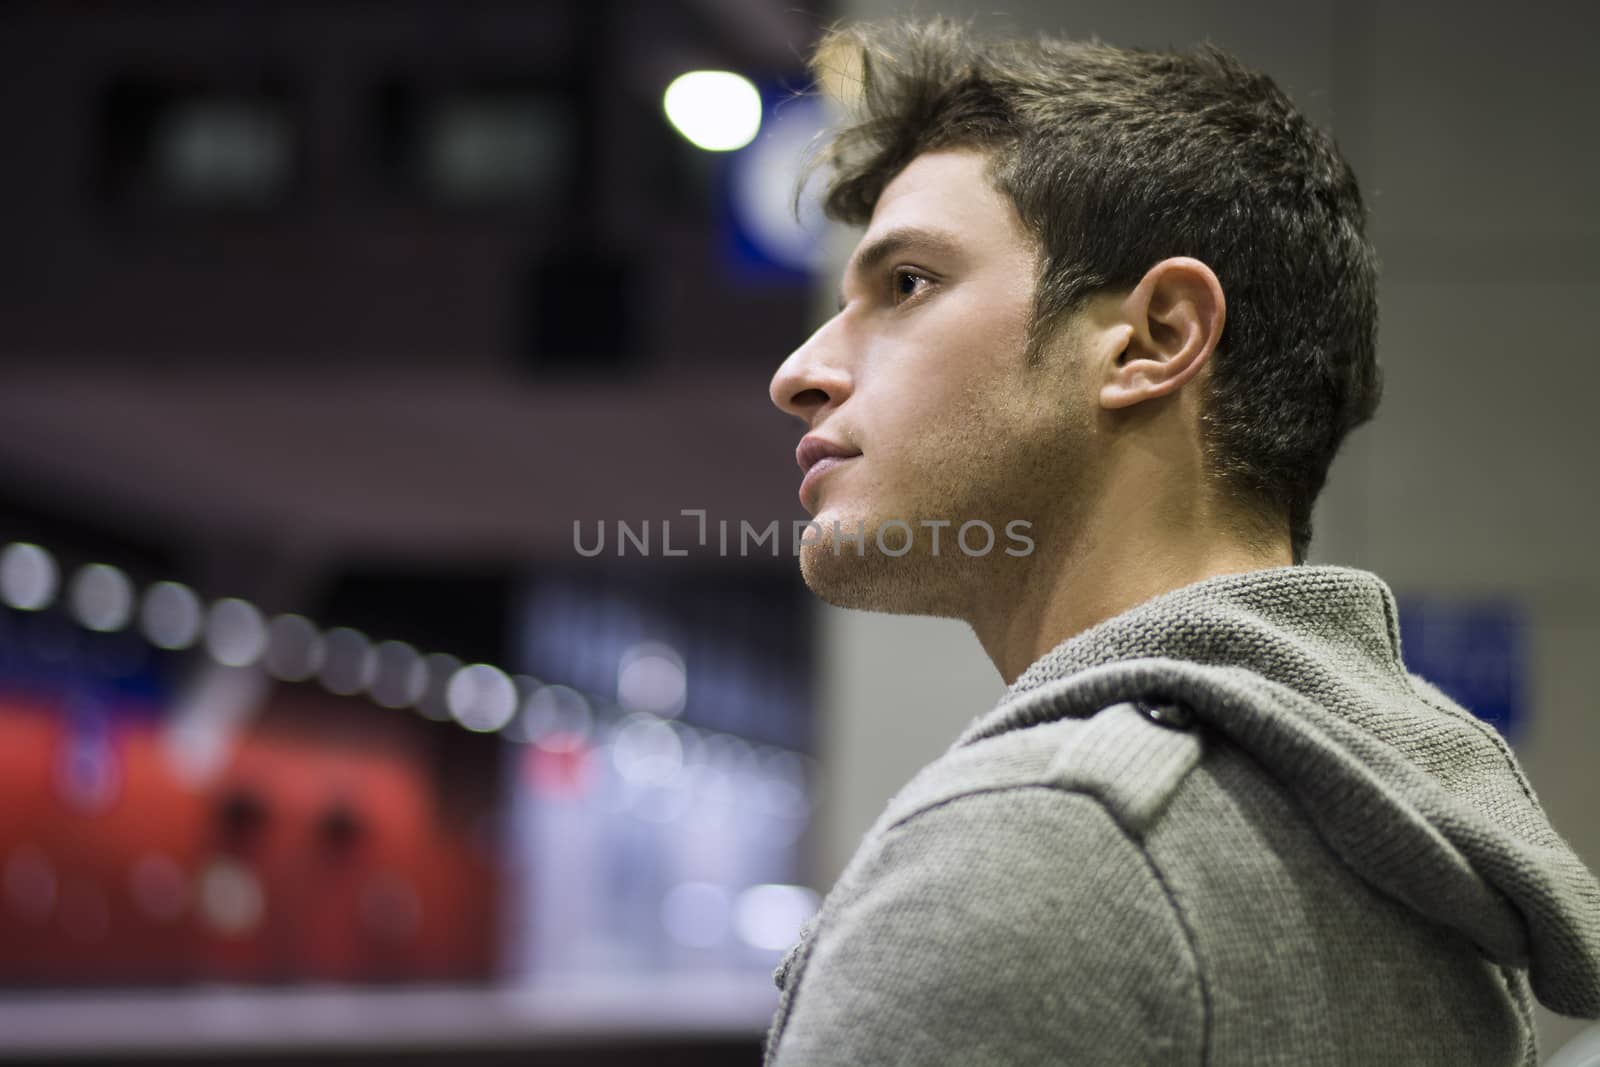 Profile shot of handsome young man inside train station by artofphoto